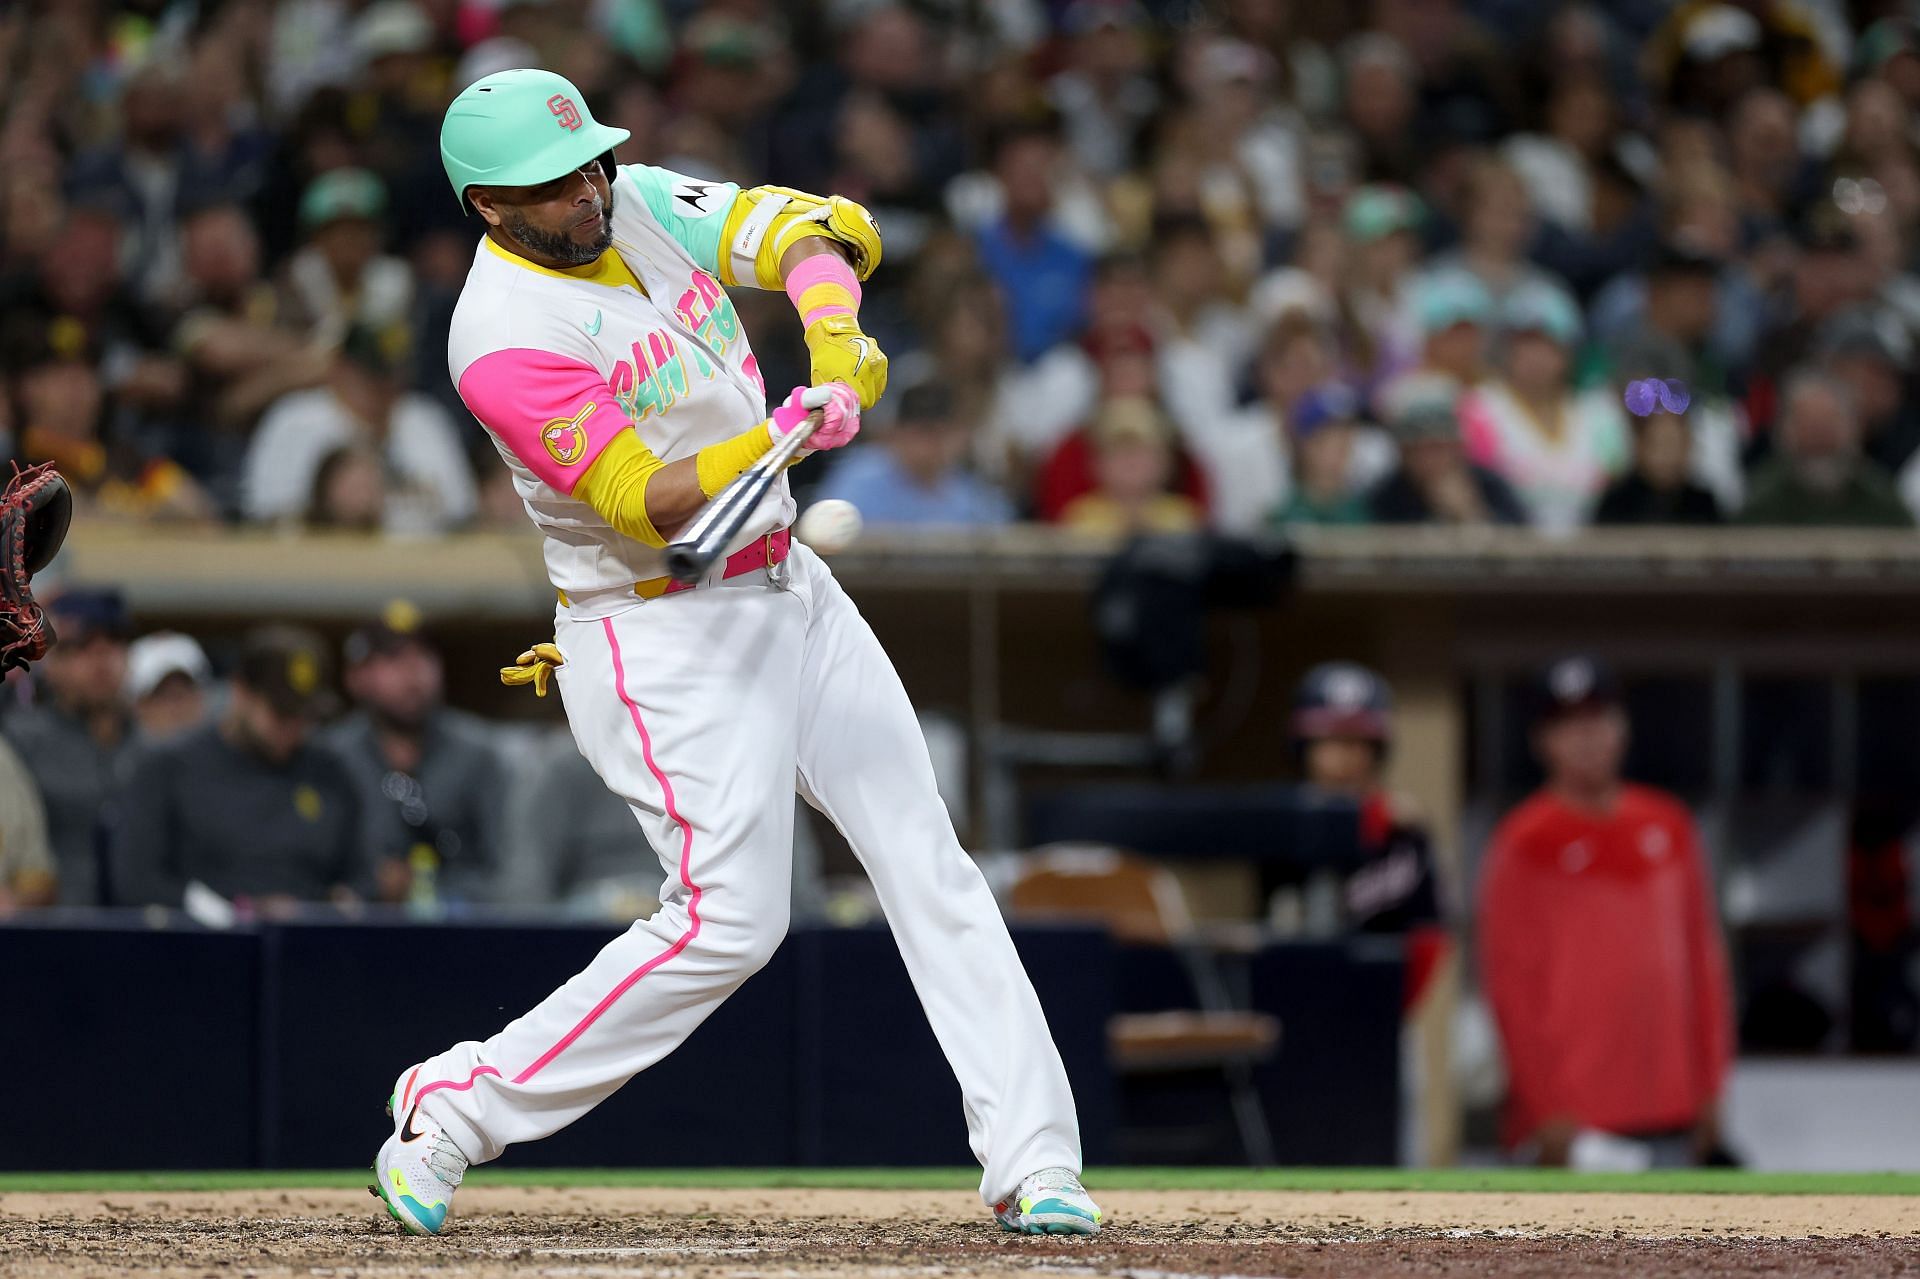 Padres Sign Nelson Cruz To One-Year Contract, by FriarWire